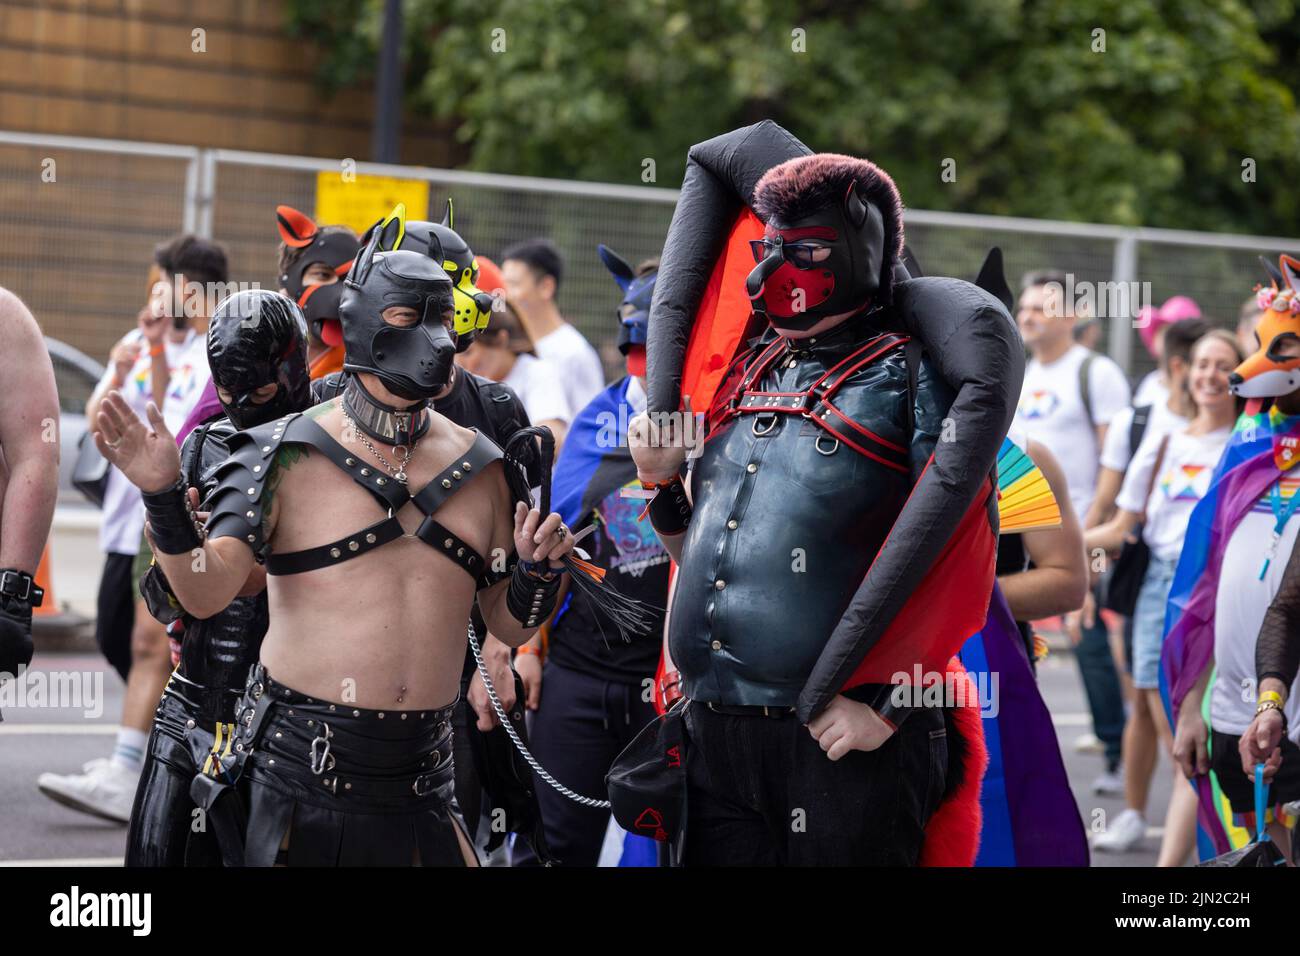 Men dress up in bondage leather costumes as part of London Pride, in Piccadilly. The annual march is a celebration for the lesbian, gay, bi-sexual, tr Stock Photo